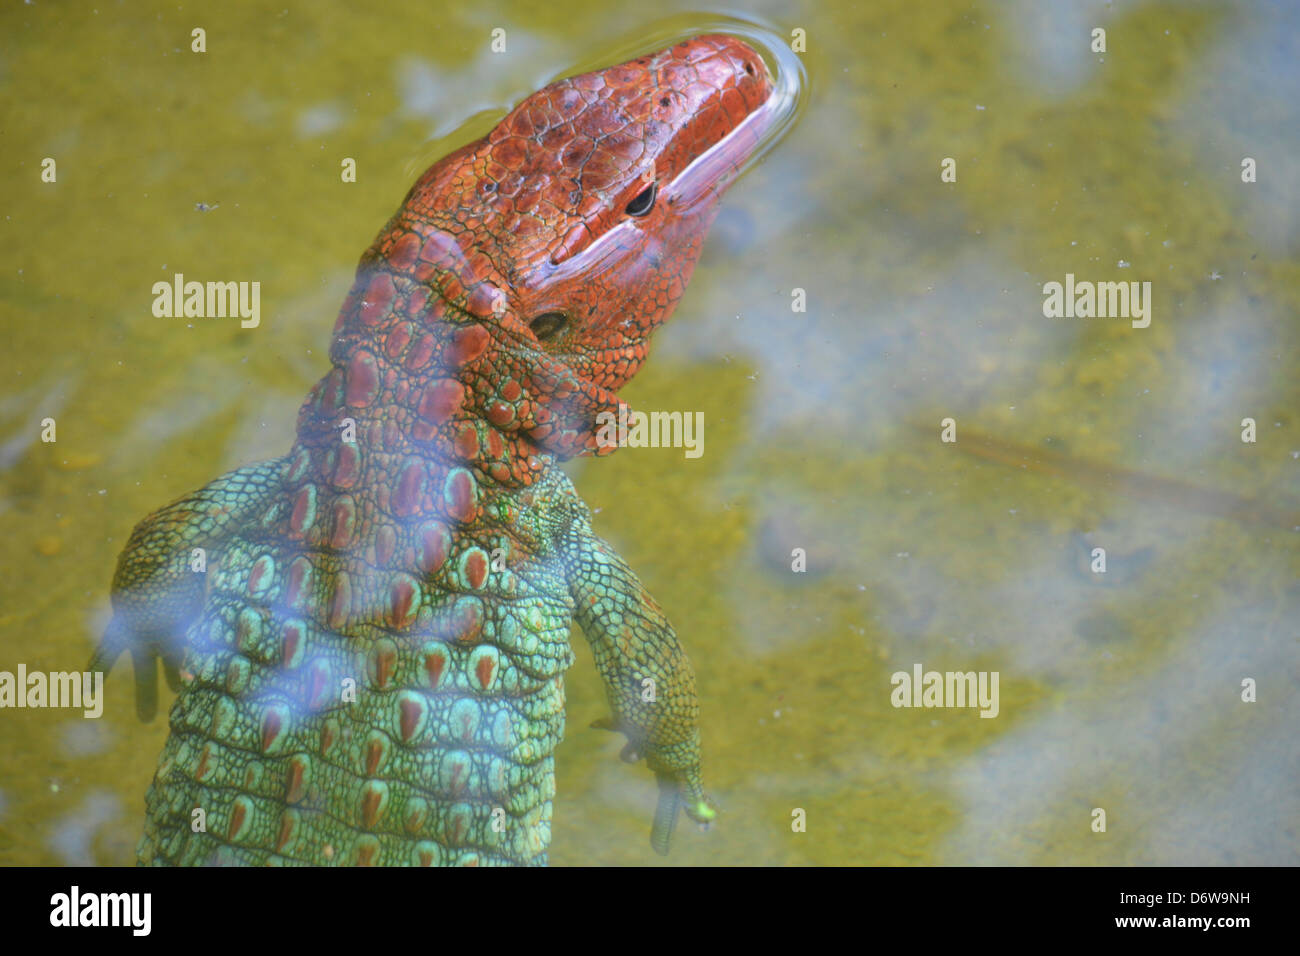 a lizard shedding its skin and changing colours Stock Photo